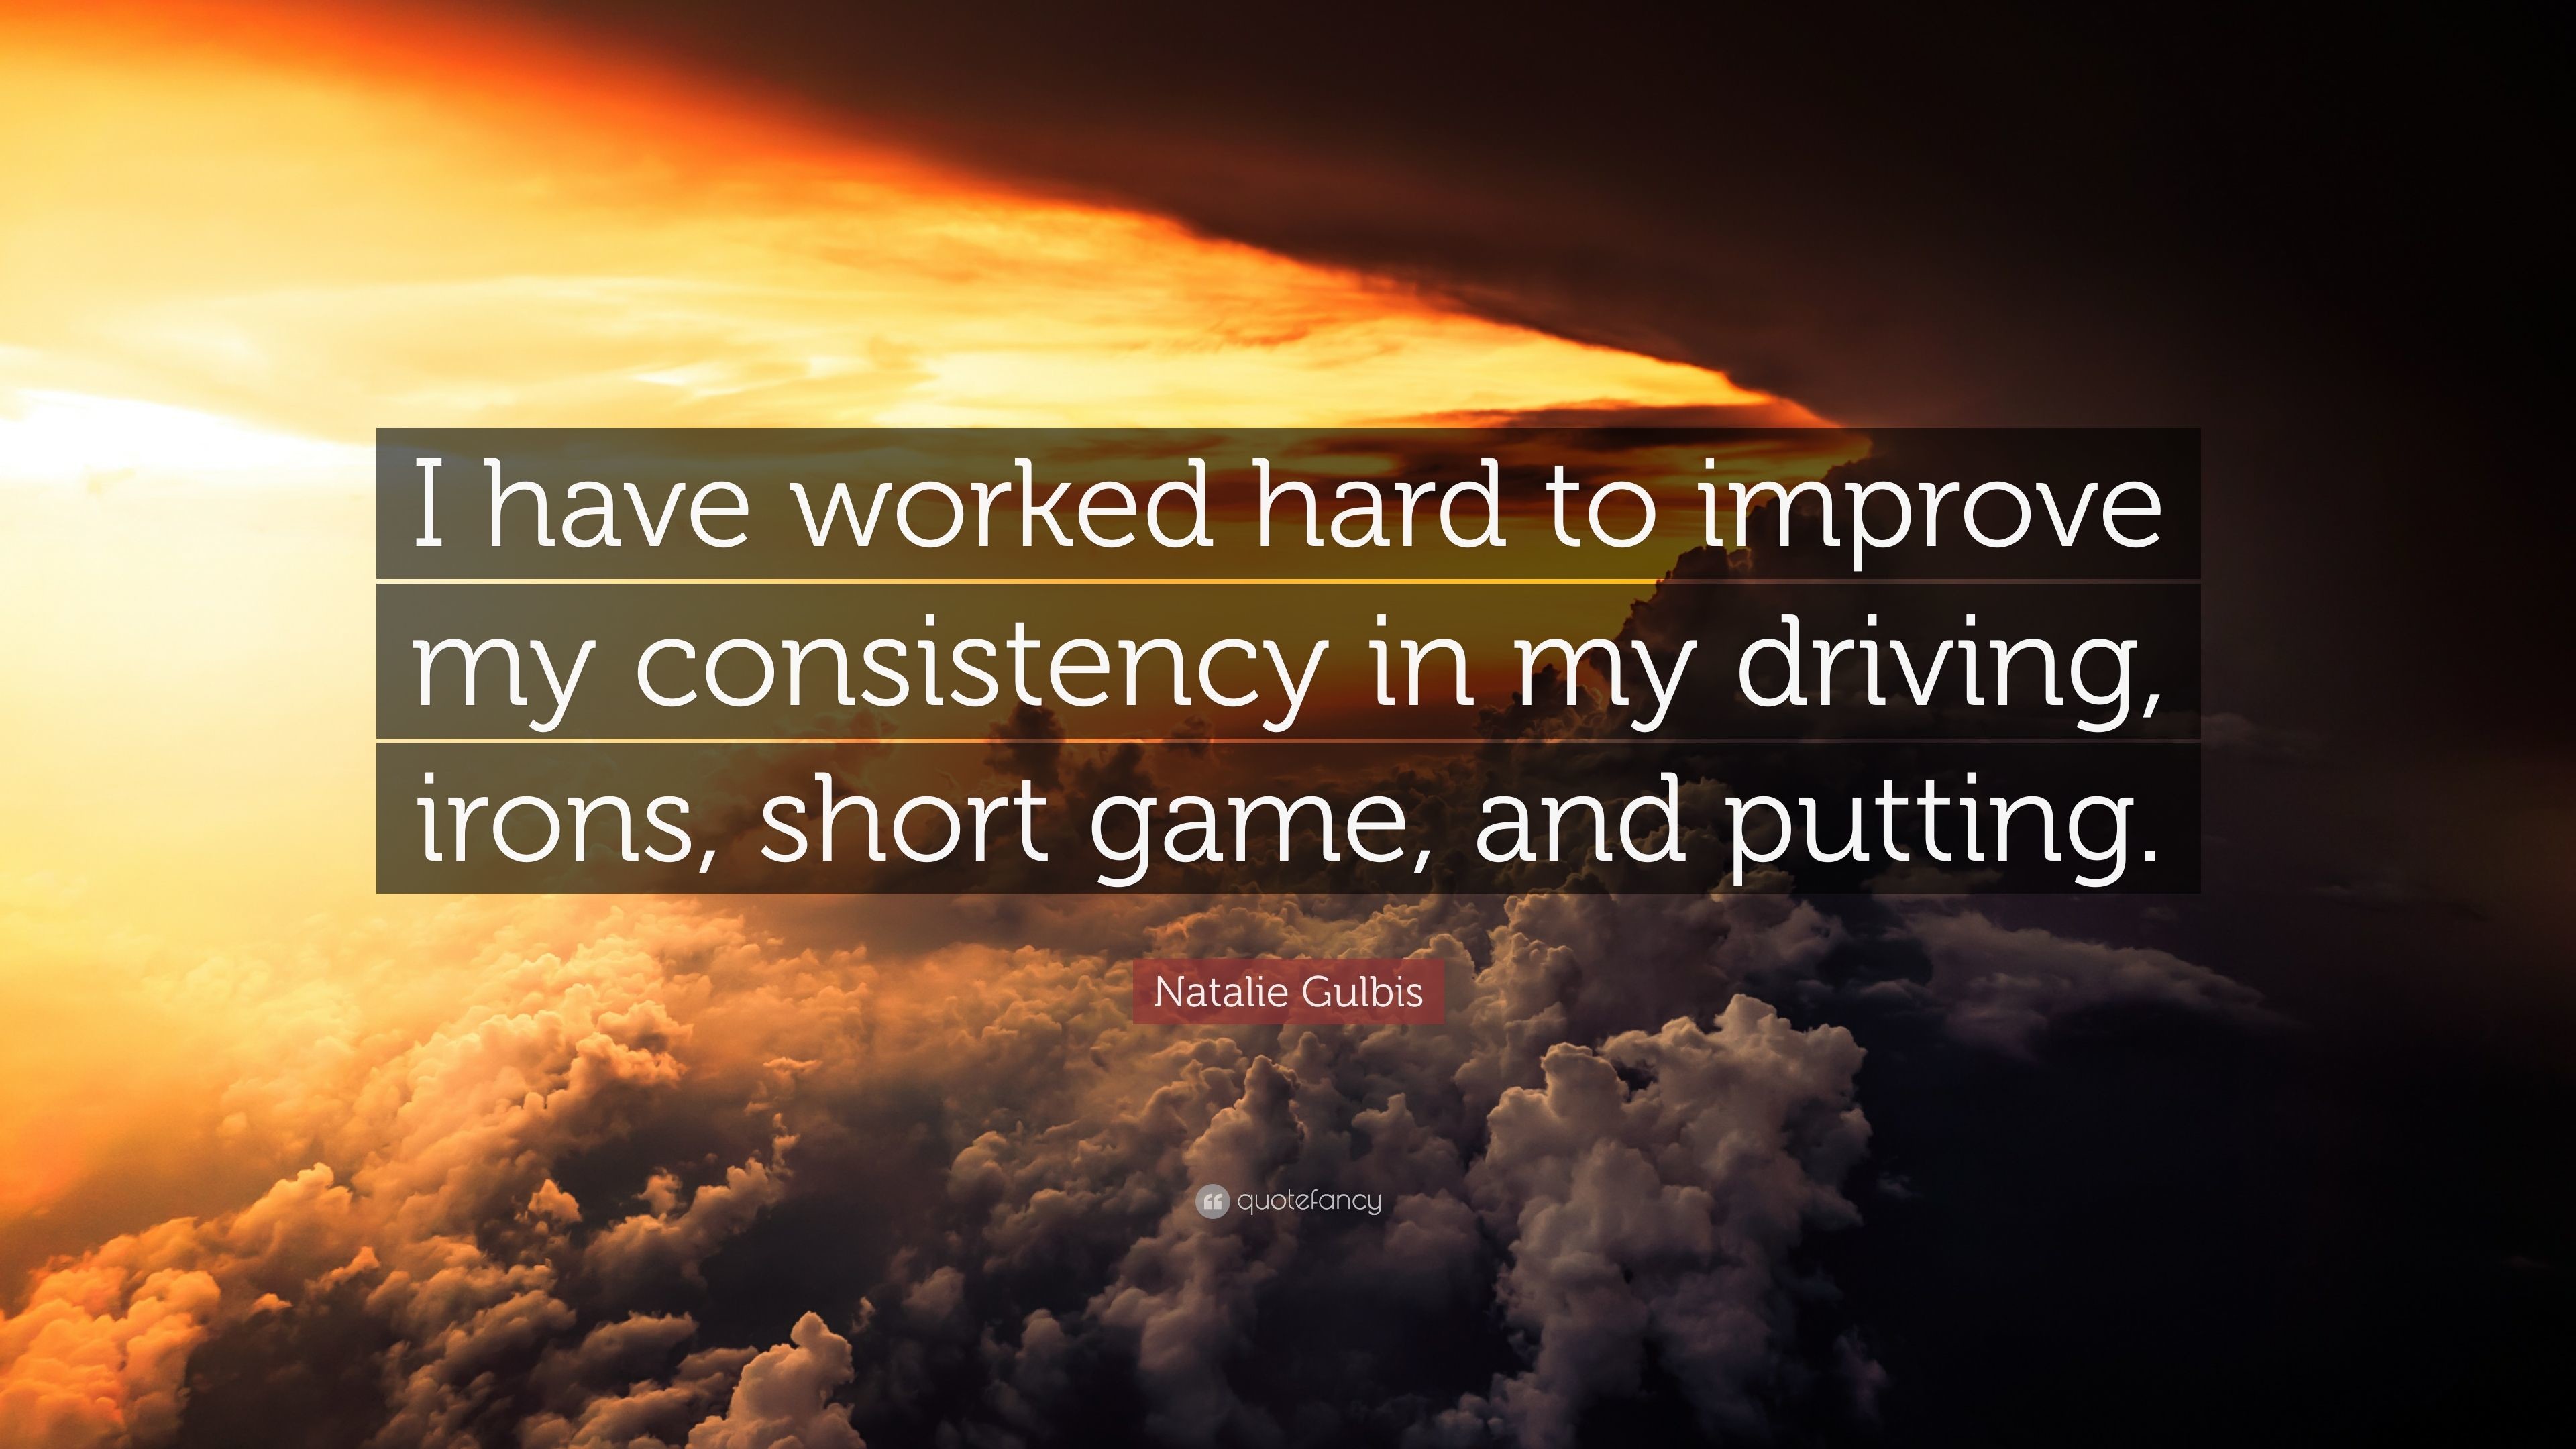 3840x2160 Natalie Gulbis Quote: “I have worked hard to improve my consistency in my  driving